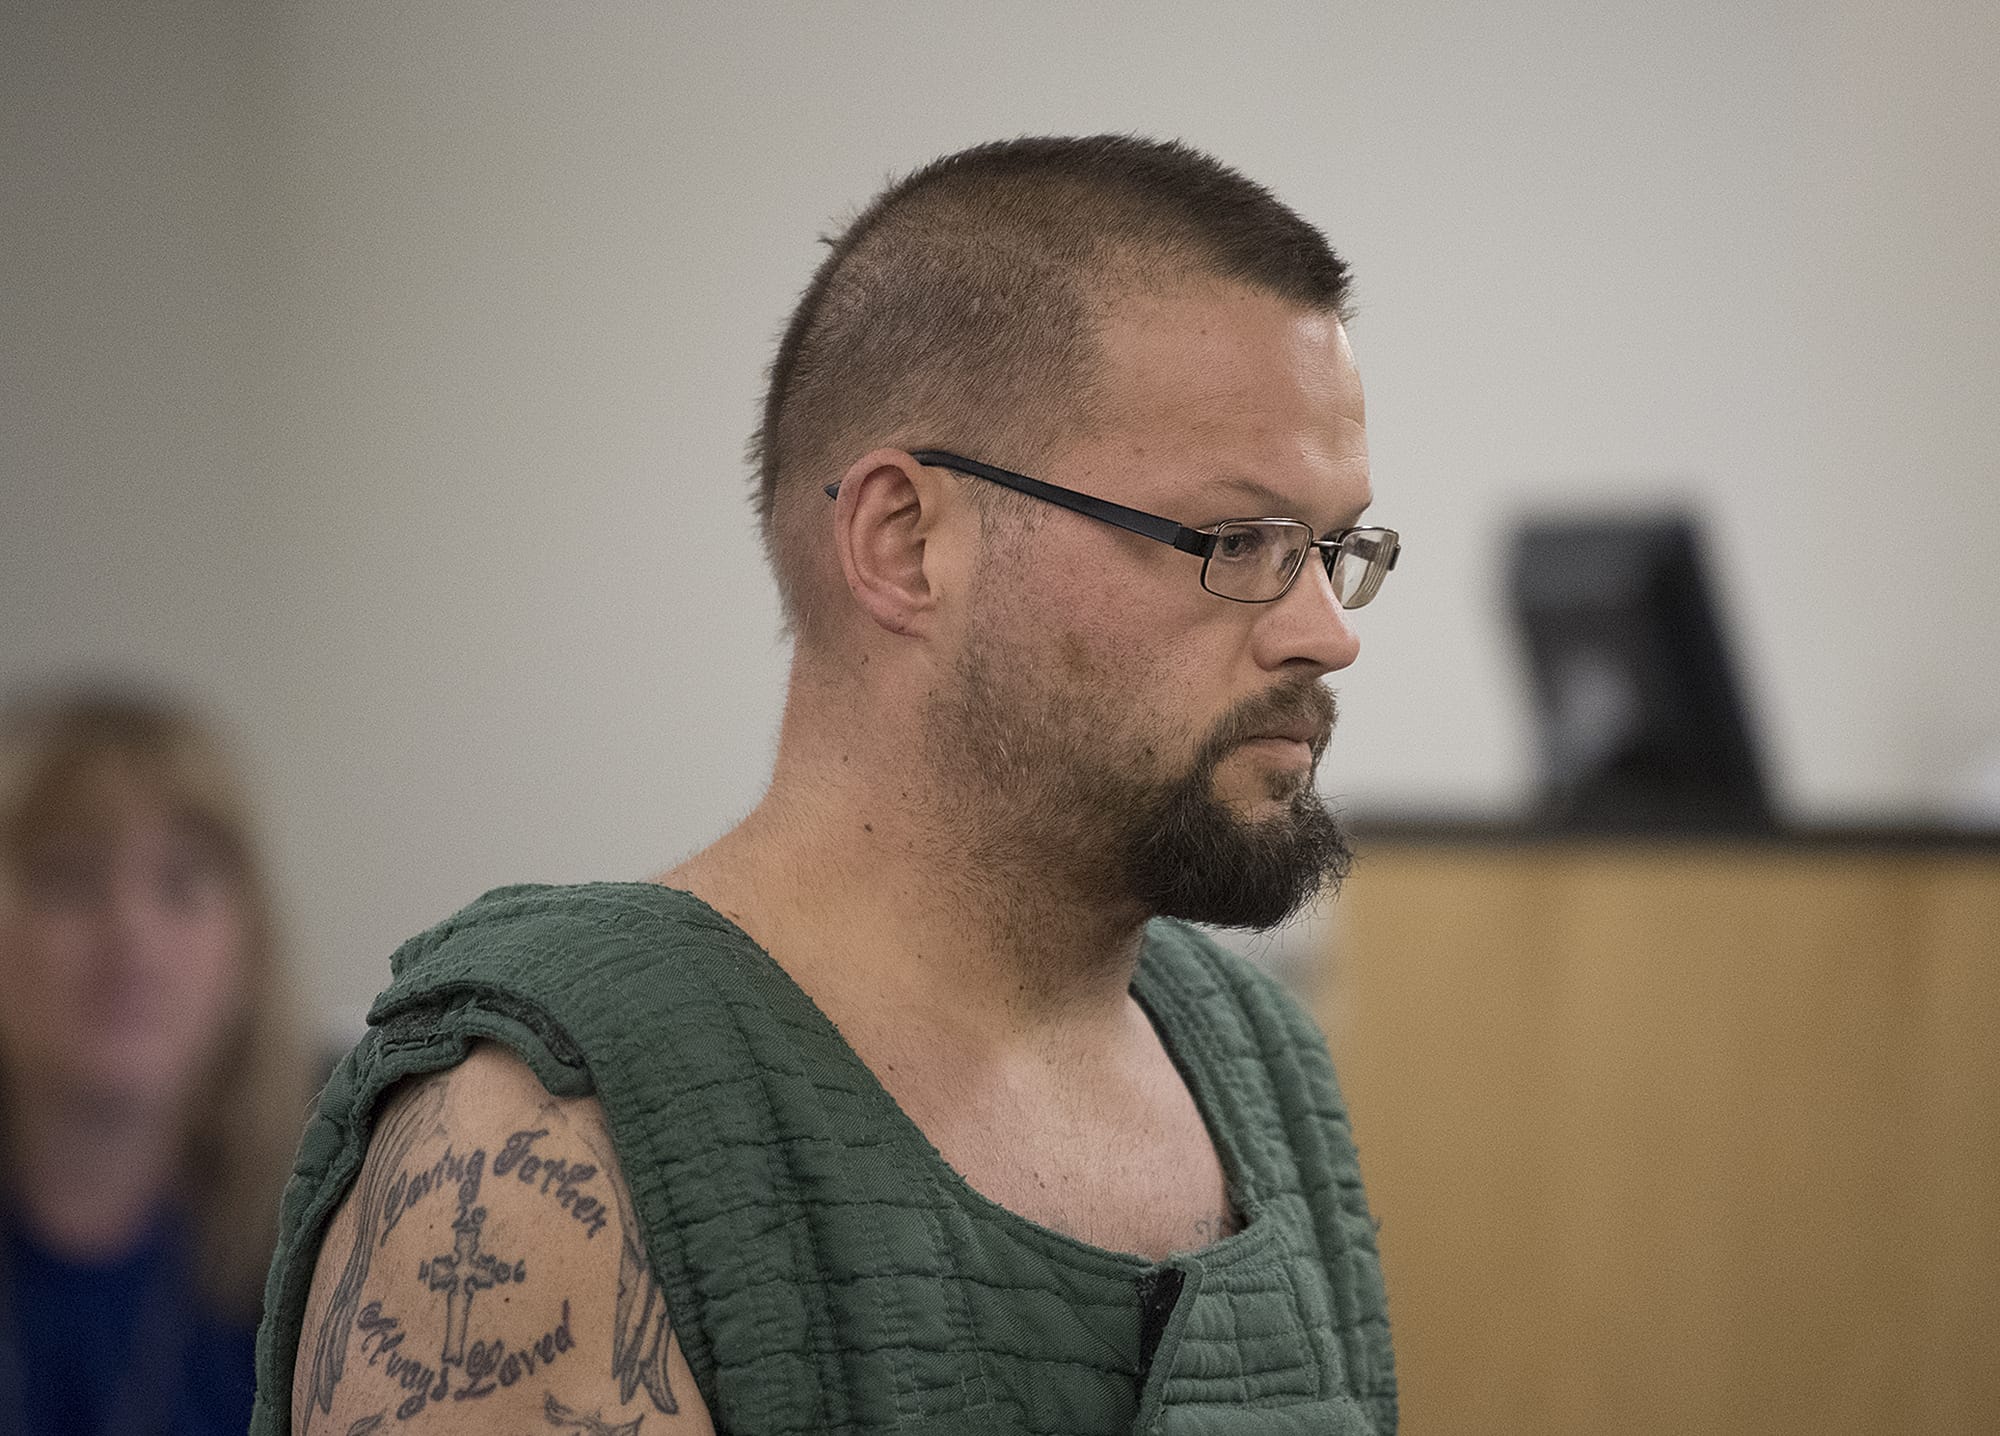 Ryan M. Burge makes a first appearance on suspicion of murder in the death of a 5-year-old in Clark County Superior Court on Monday morning, Nov. 5, 2018.